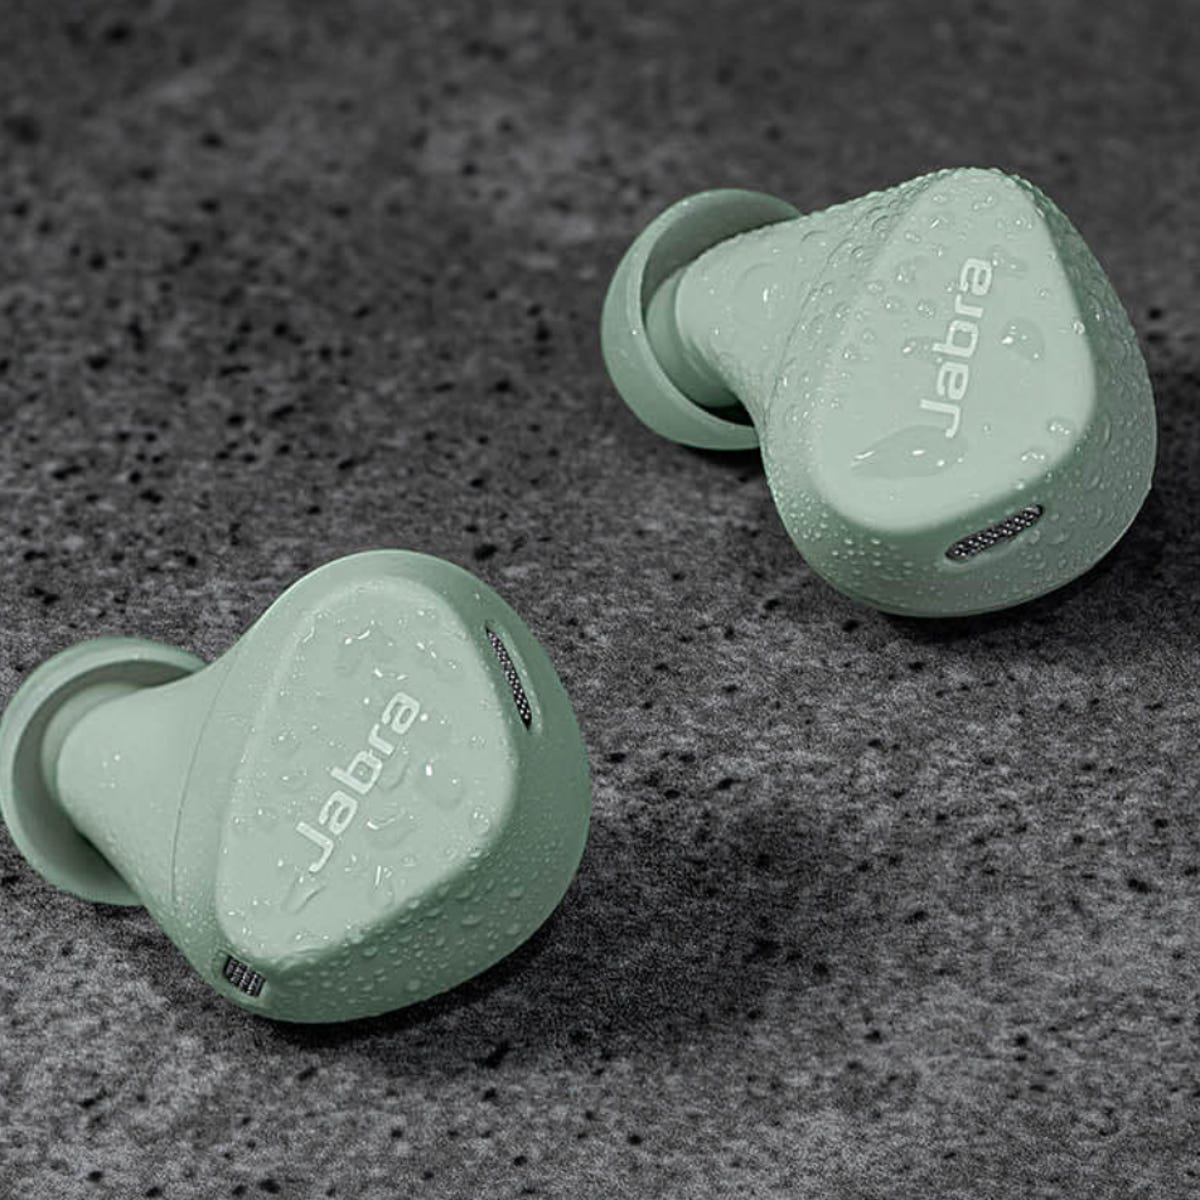 Jabra Elite 4 Active: We got our hands on the new earbuds at CES 